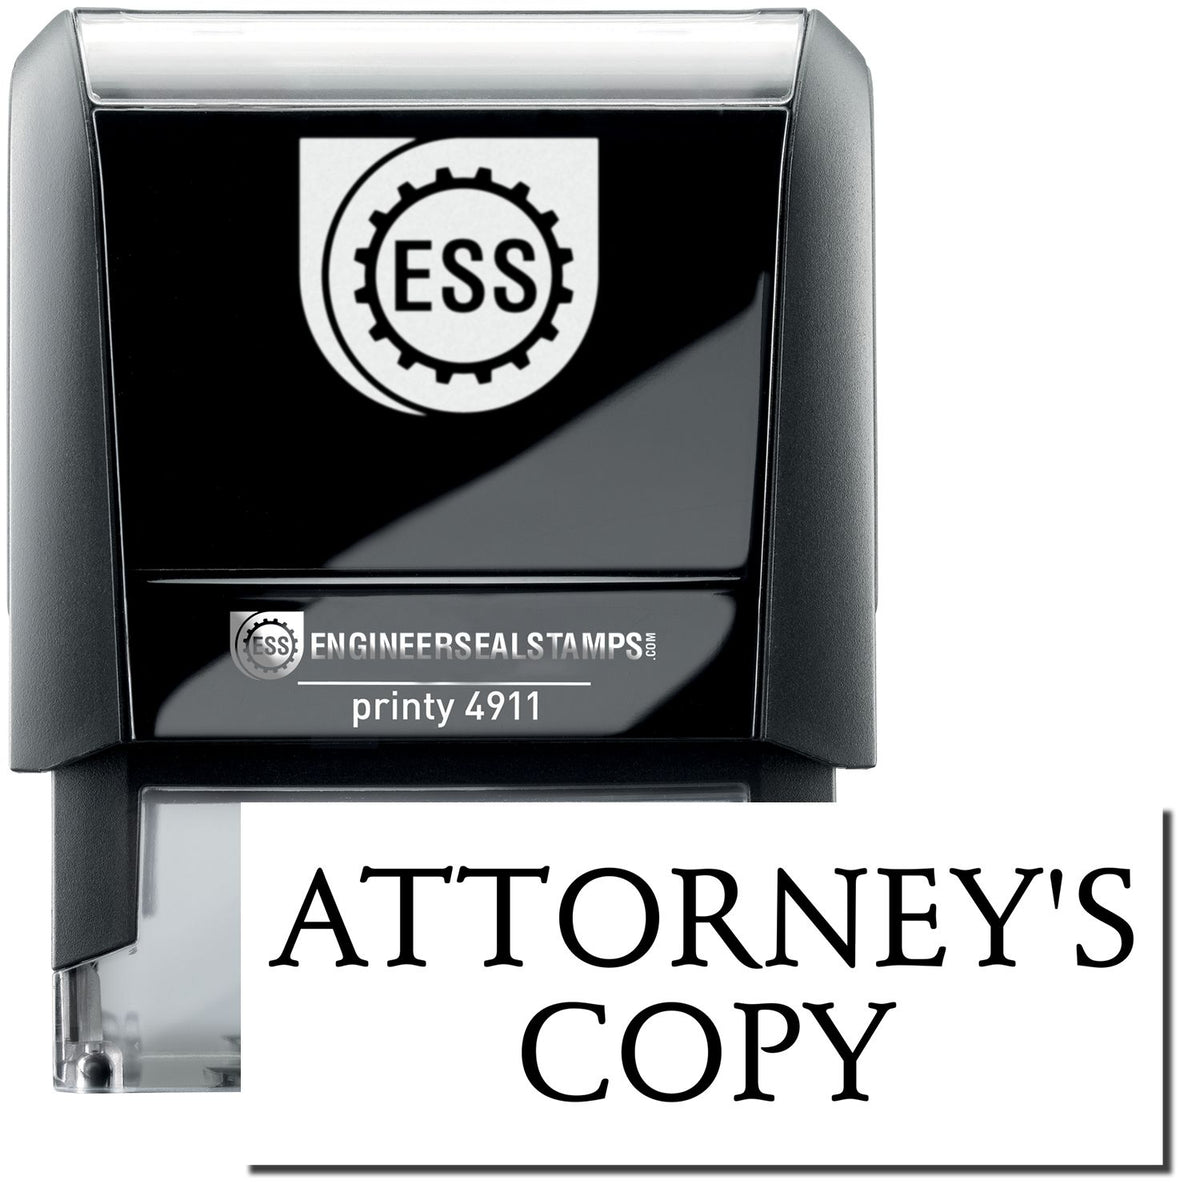 A self-inking stamp with a stamped image showing how the text &quot;ATTORNEY&#39;S COPY&quot; is displayed after stamping.